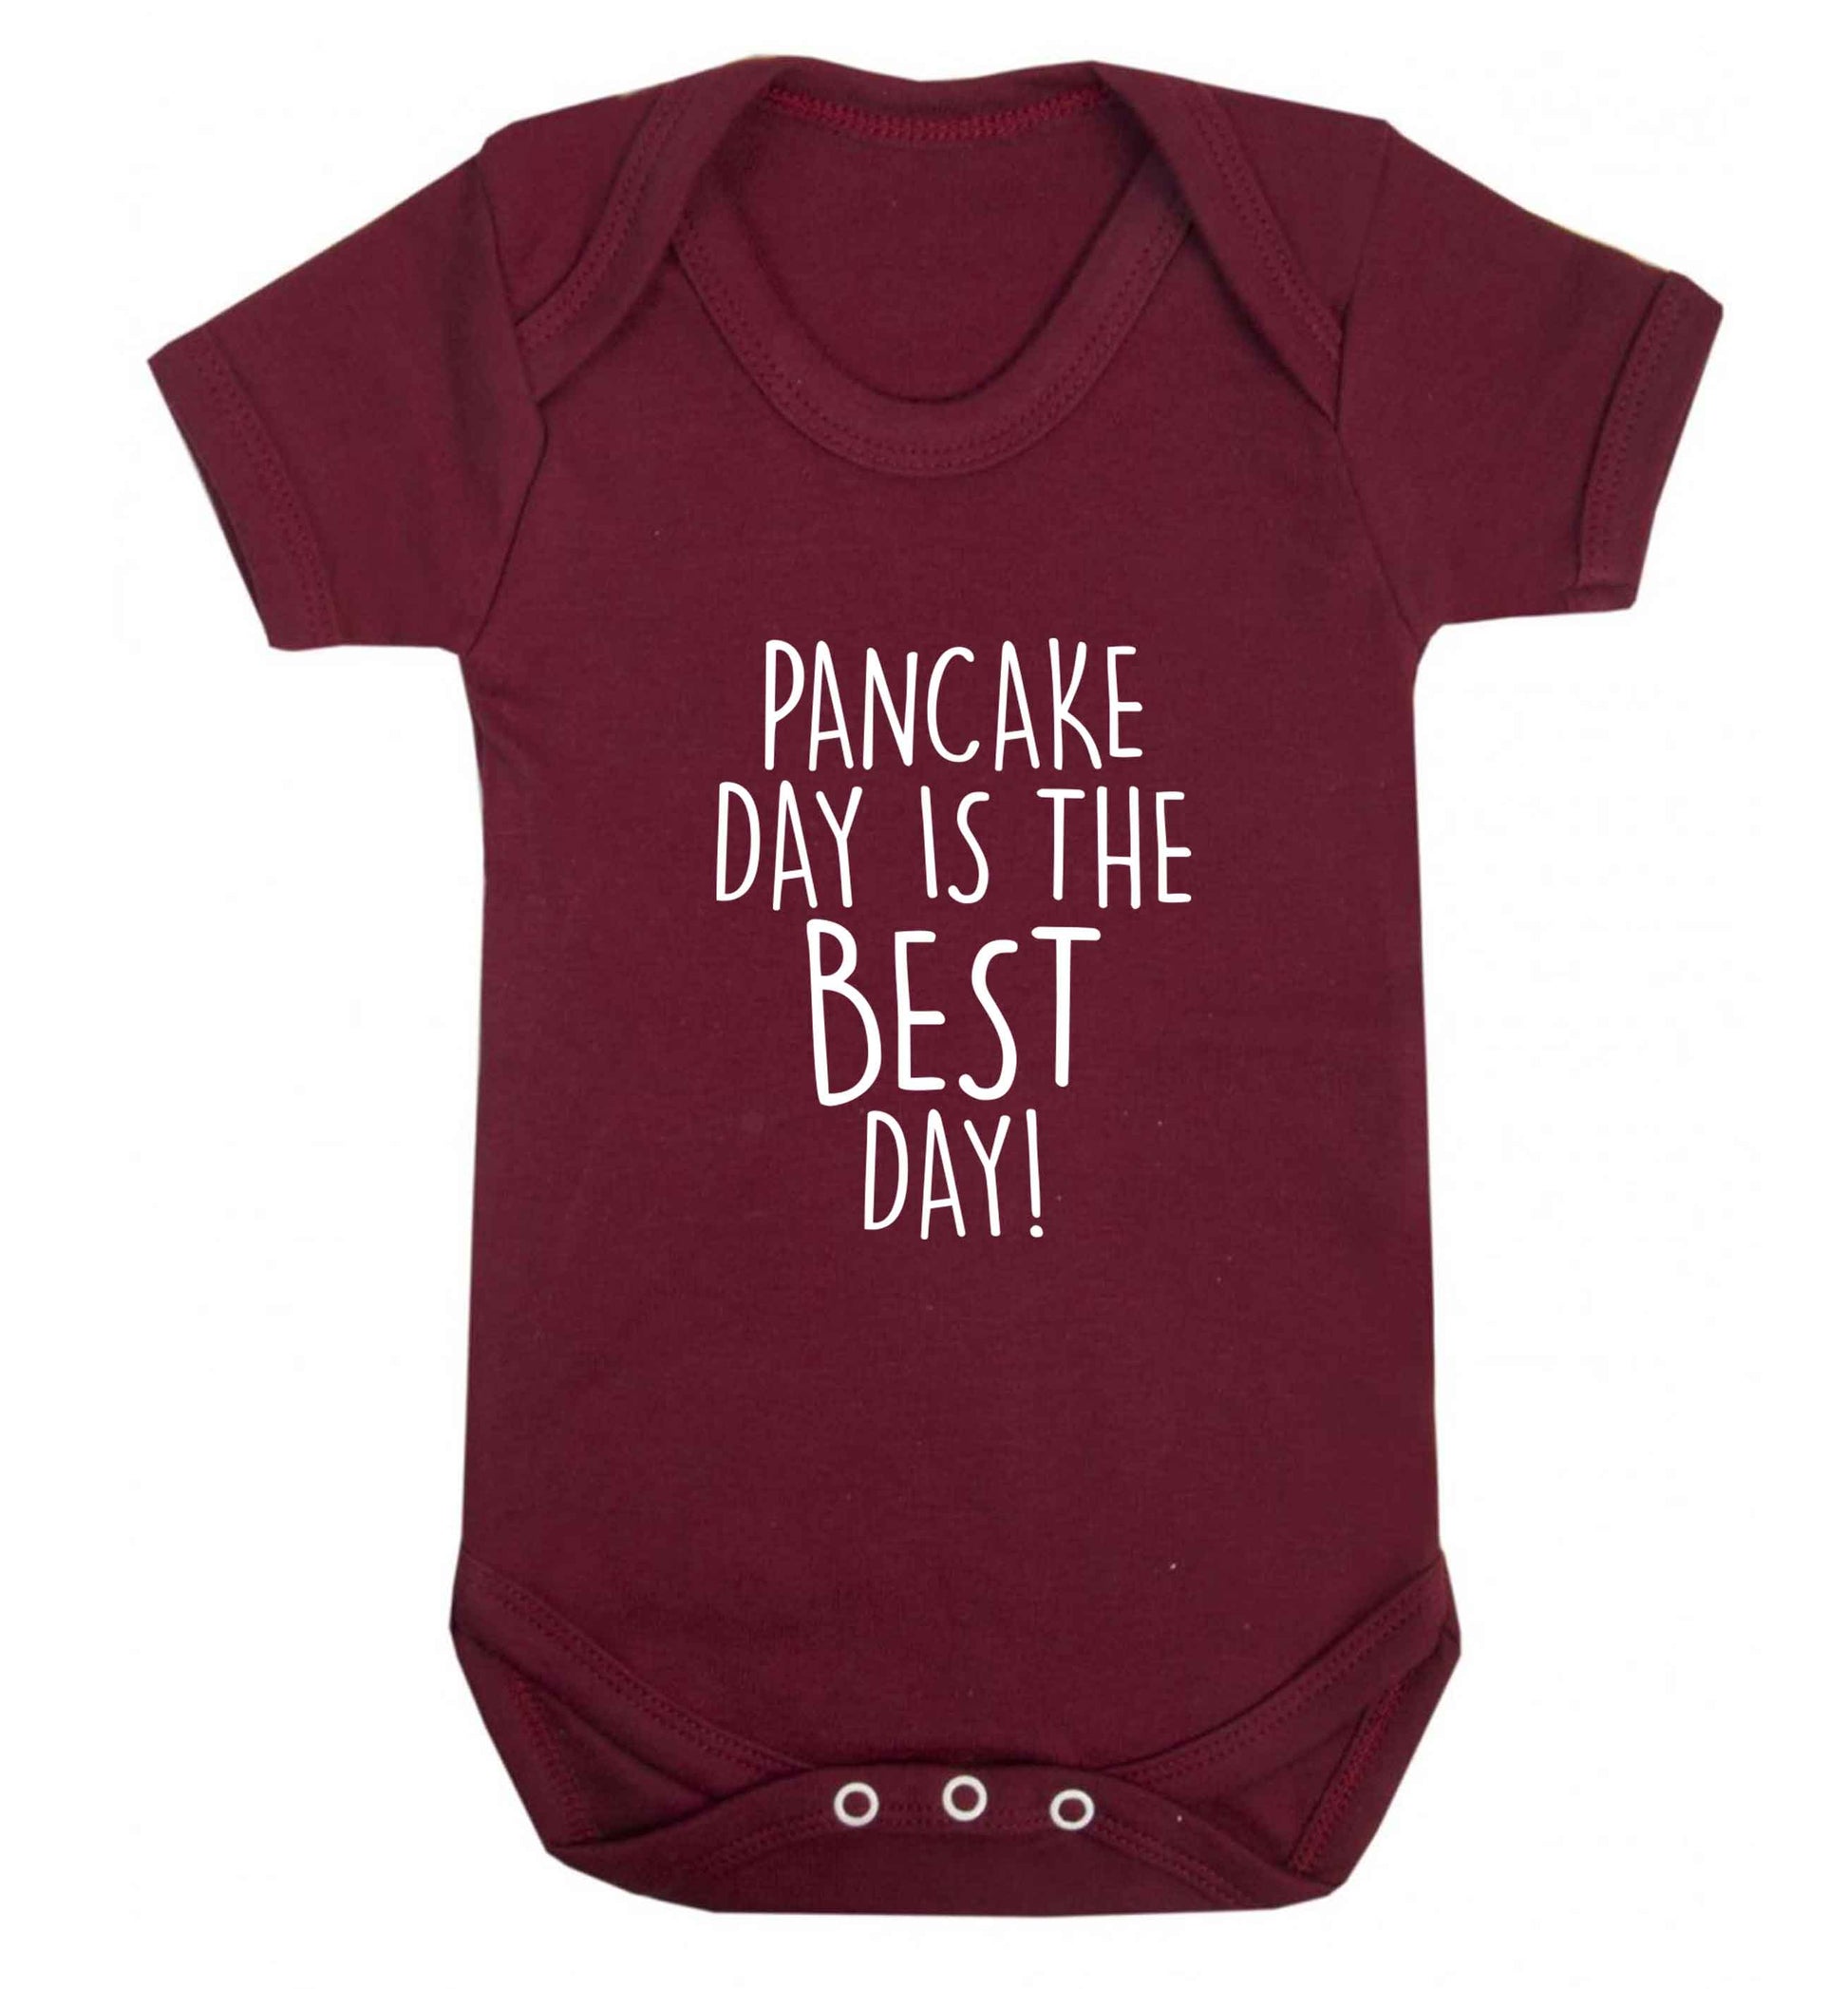 Pancake day is the best day baby vest maroon 18-24 months